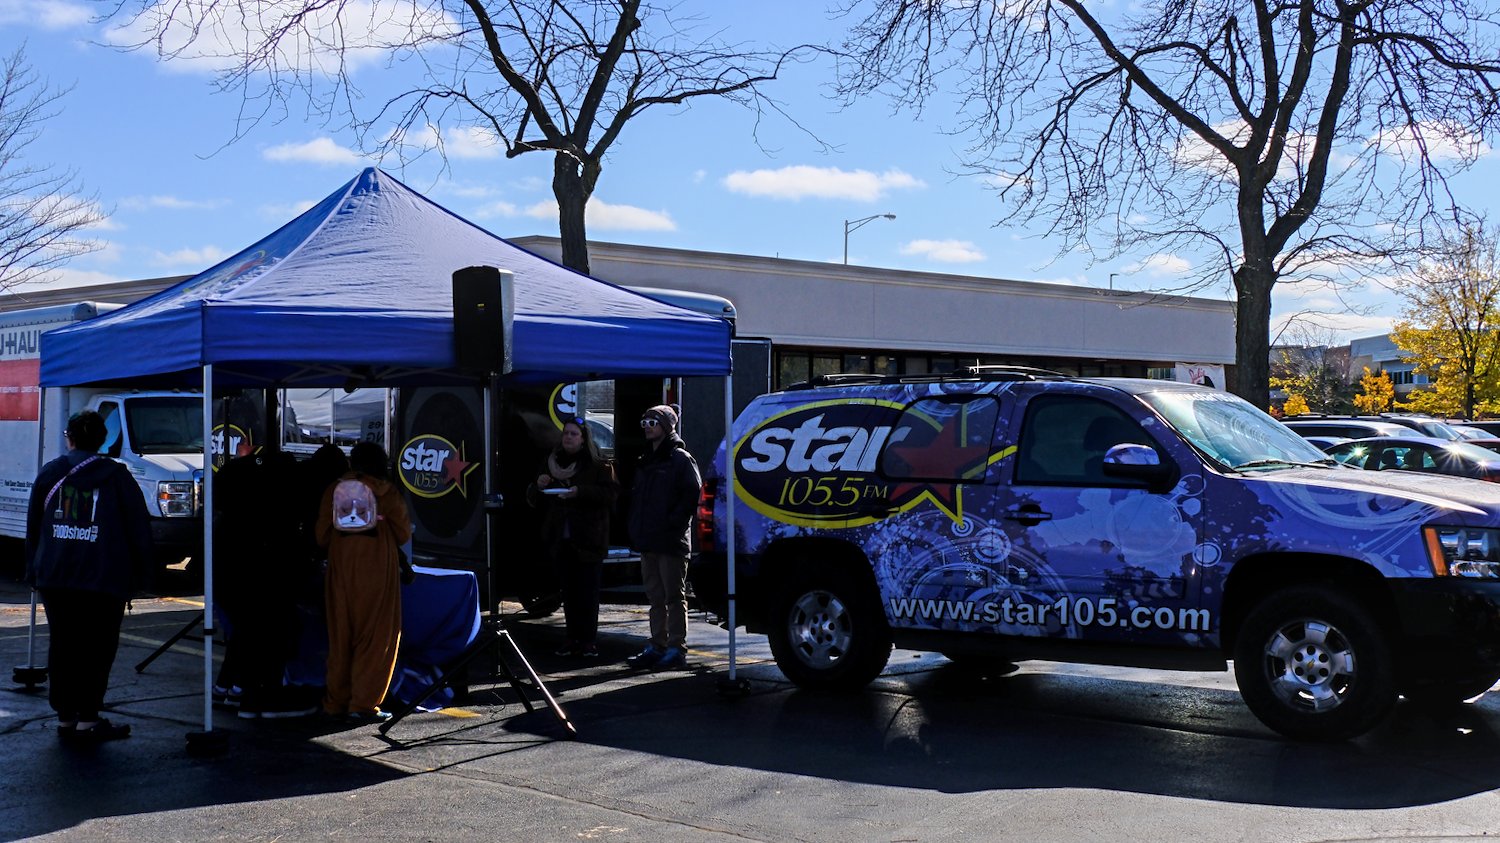 Star 105.5 playing some tunes for everyone.